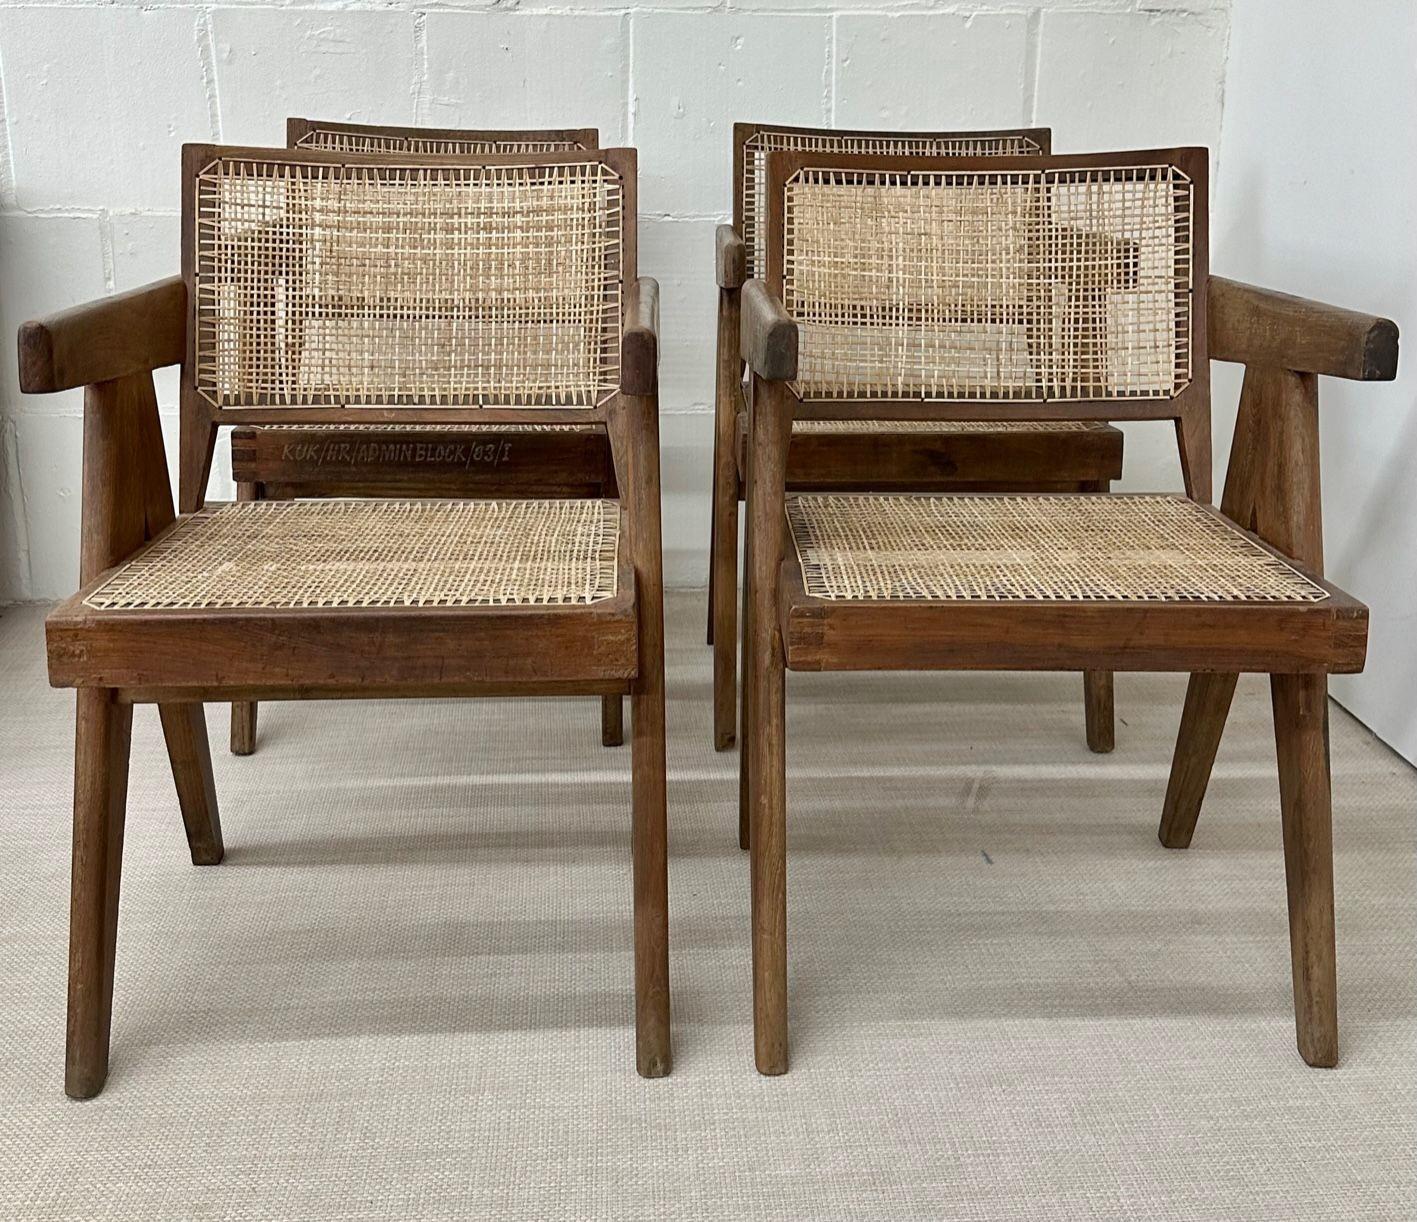 Pierre Jeanneret, Mid-Century Modern, Dining Chairs, Teak, Cane, India, 1960s 12